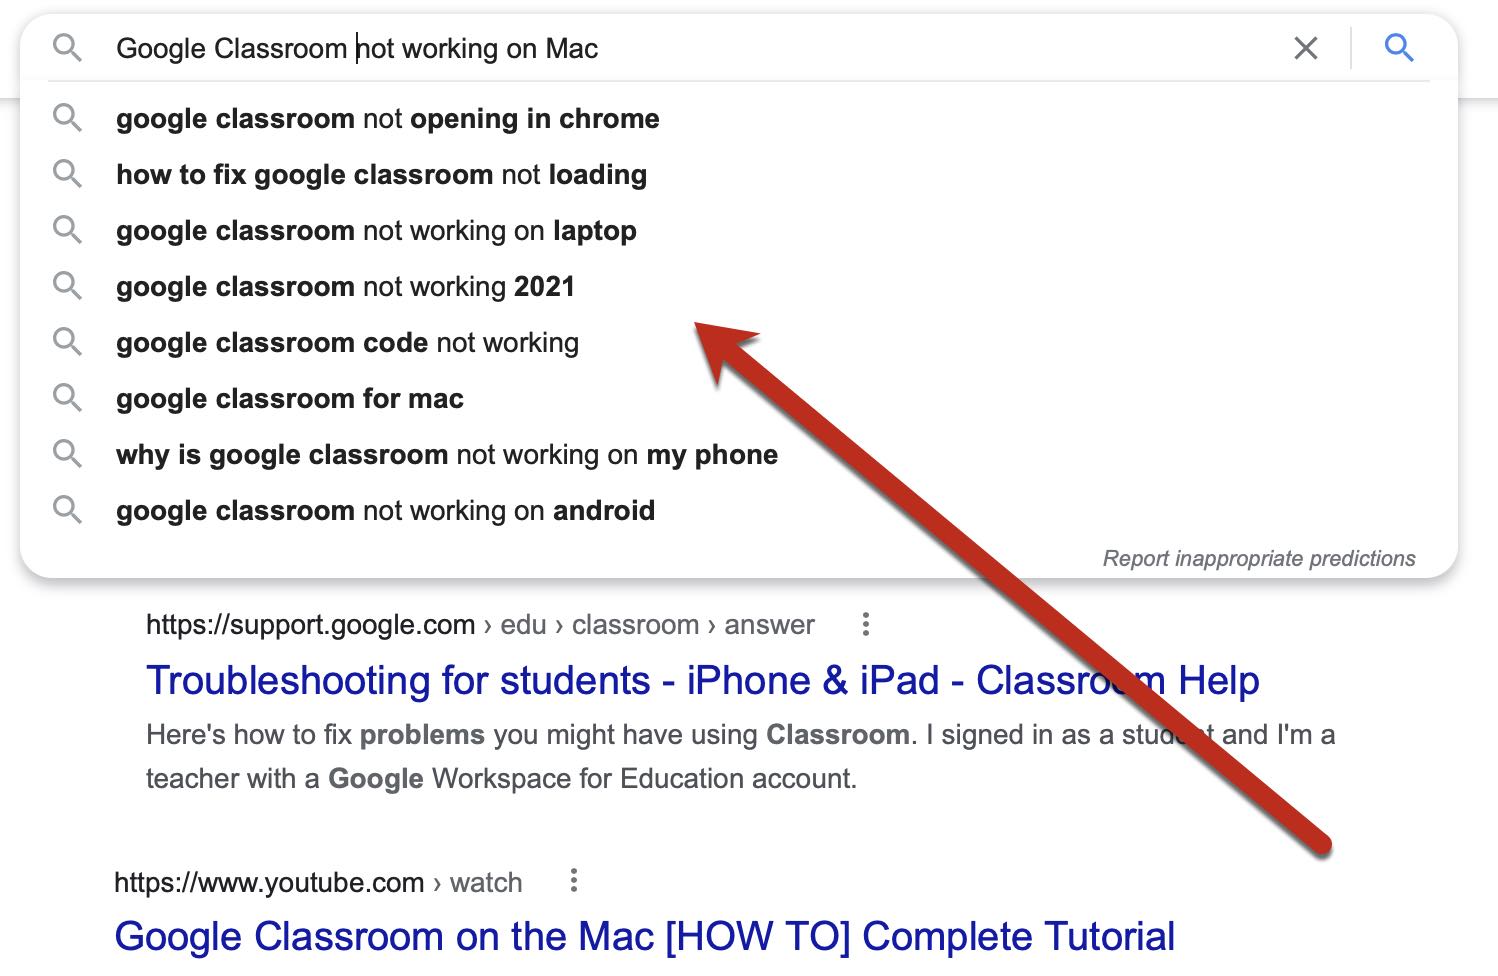 Screenshot showing a refinements for "Google Classroom not working on Mac"